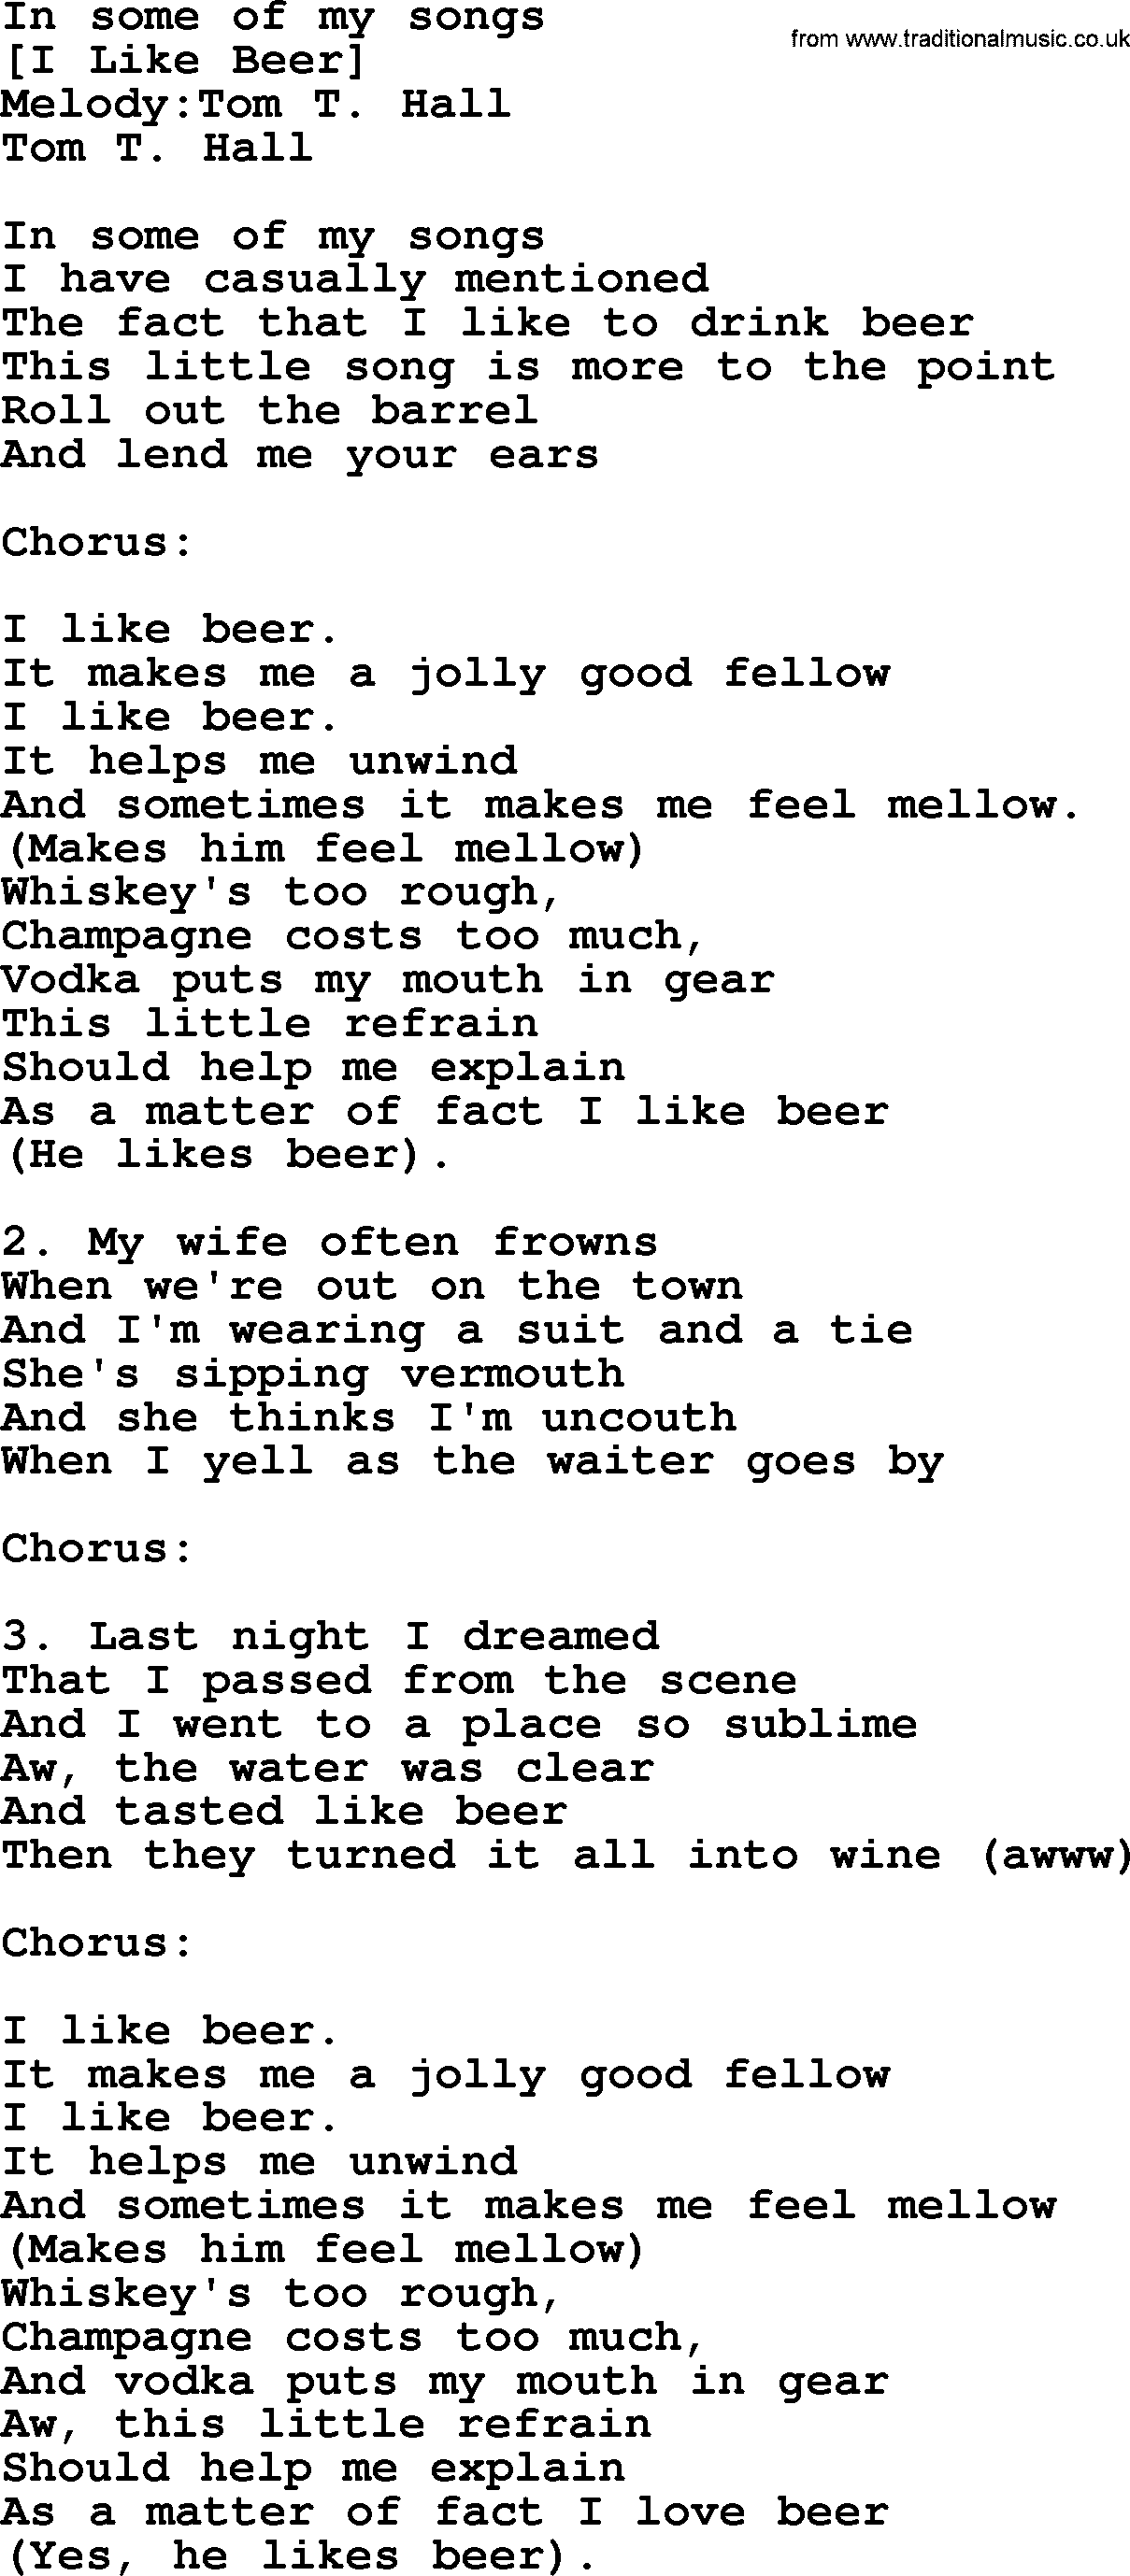 Old American Song: In Some Of My Songs, lyrics